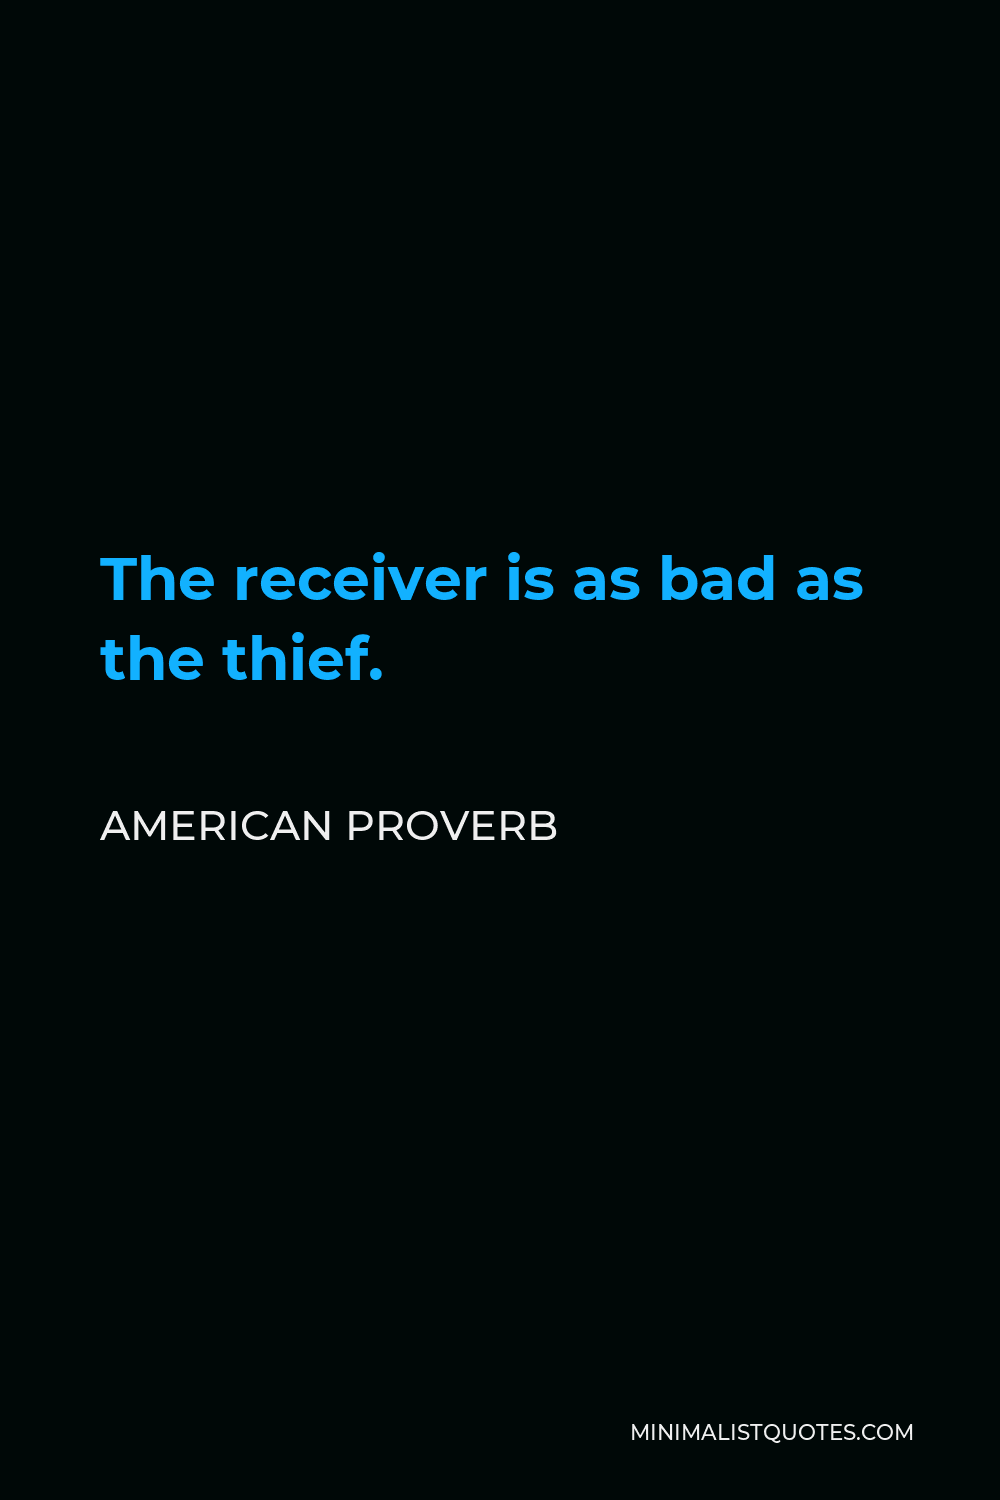 American Proverb Quote - The receiver is as bad as the thief.